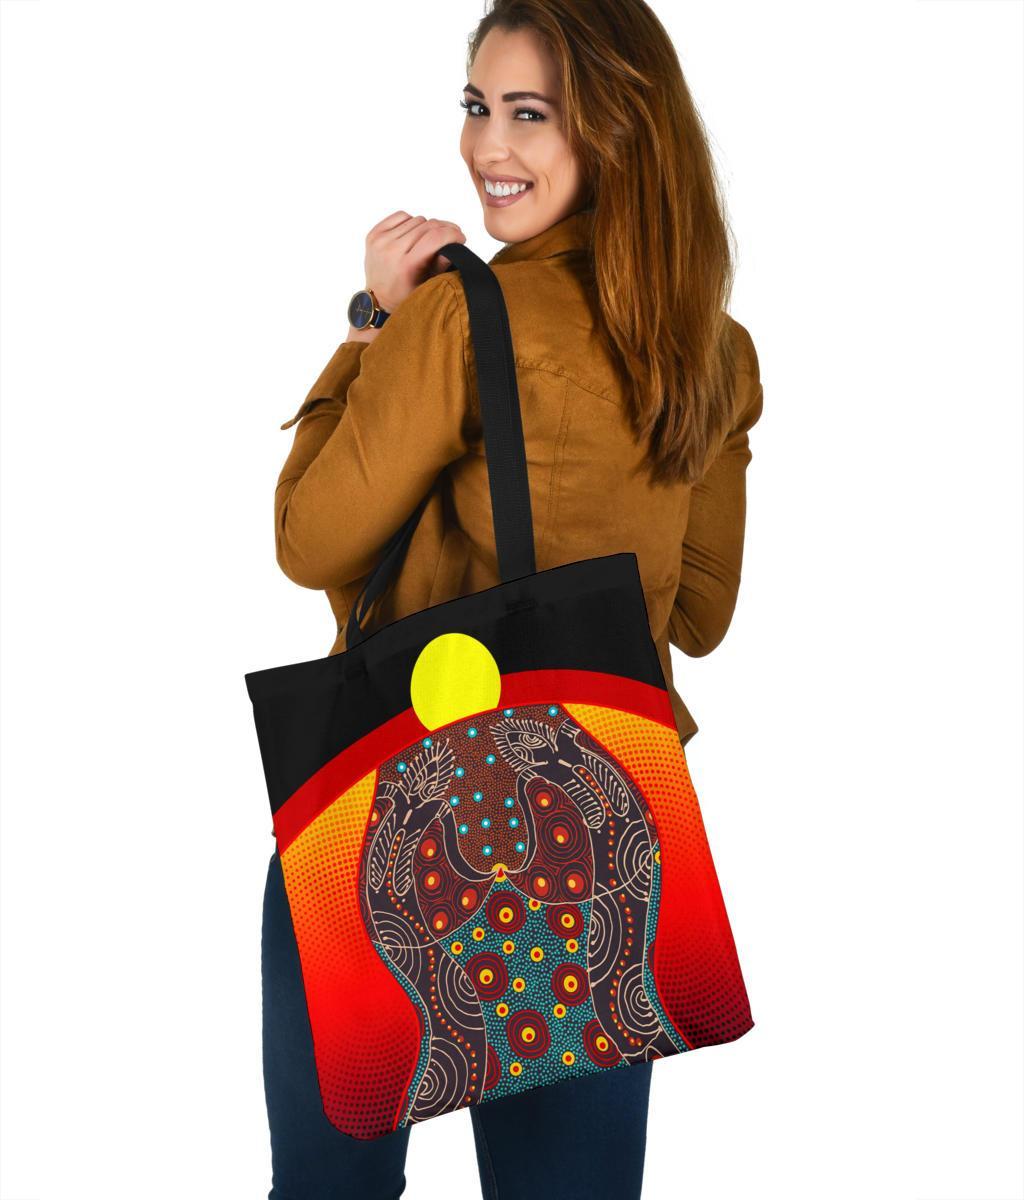 tote-bag-aboriginal-sublimation-dot-pattern-style-red